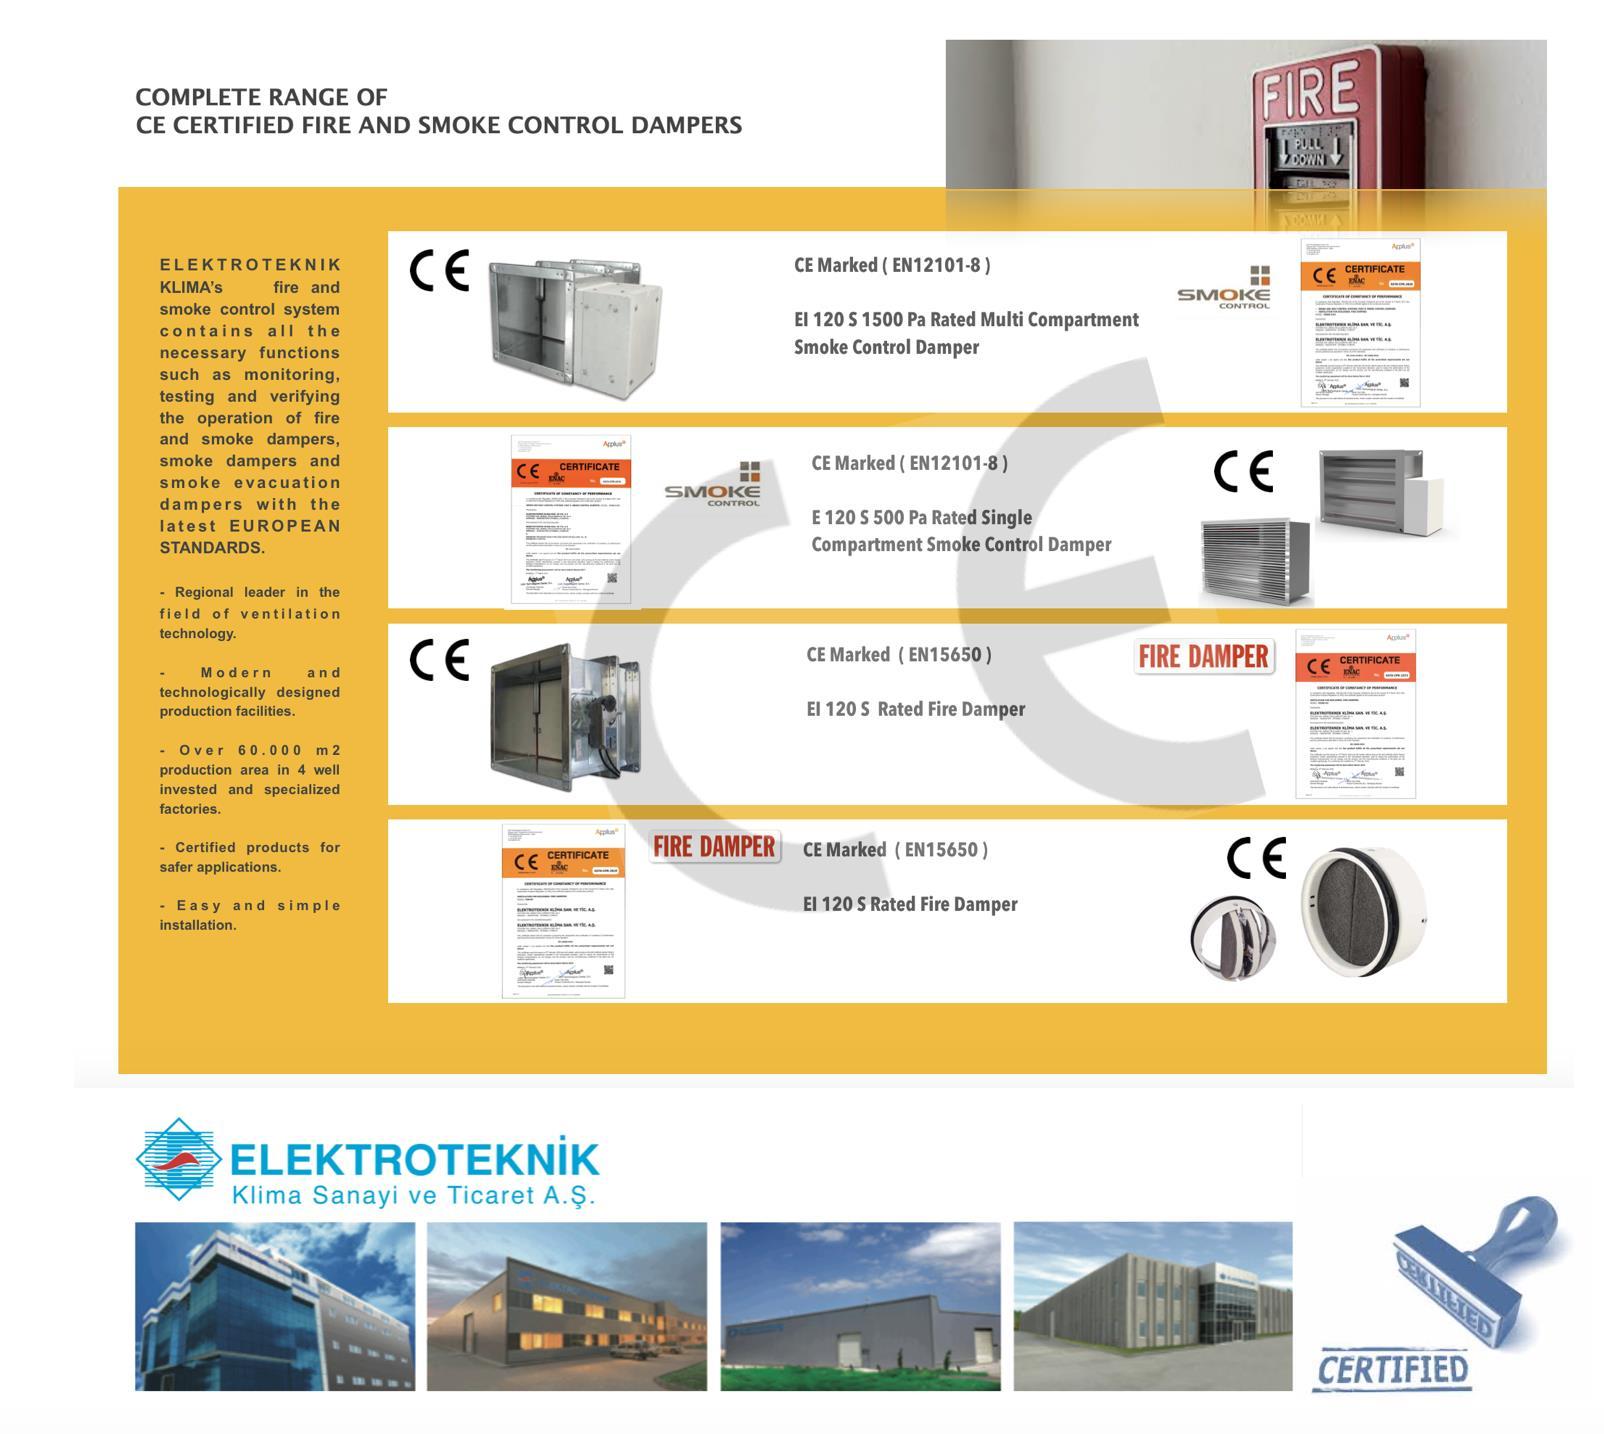 COMPLETE RANGE OF CE CERTIFIED FIRE AND SMOKE CONTROL DAMPERS